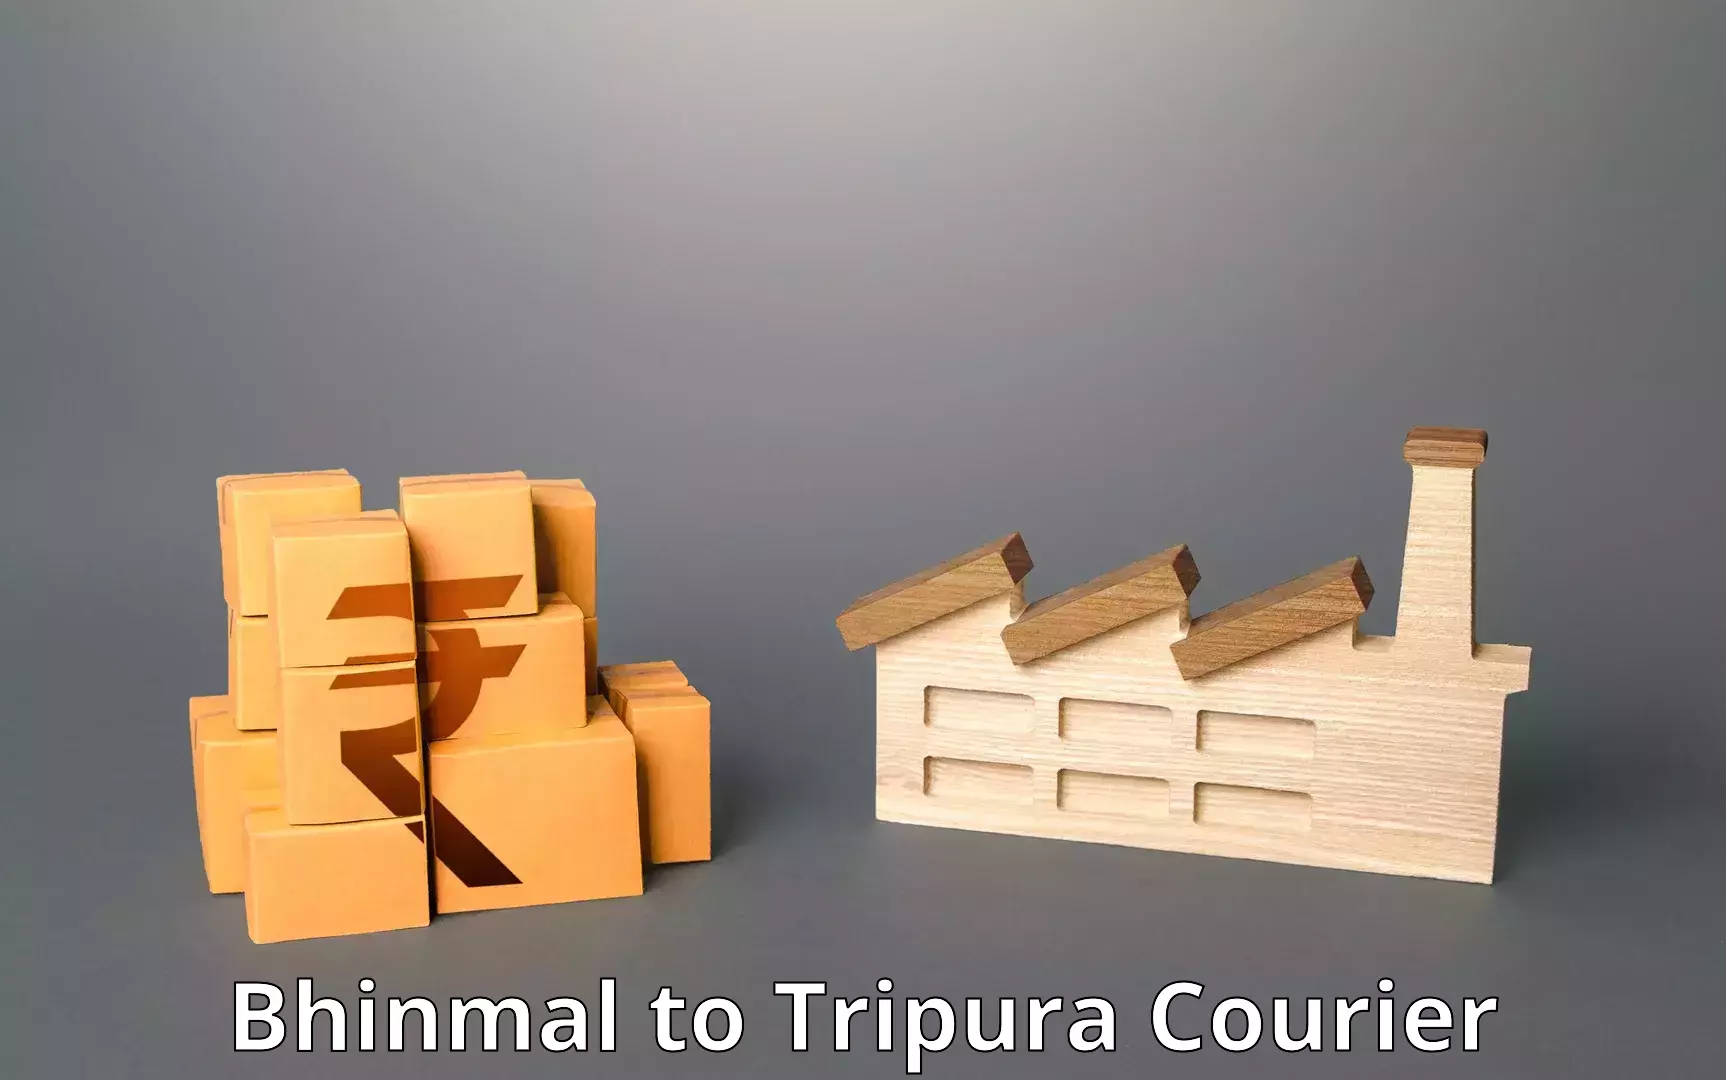 Courier service innovation Bhinmal to Tripura